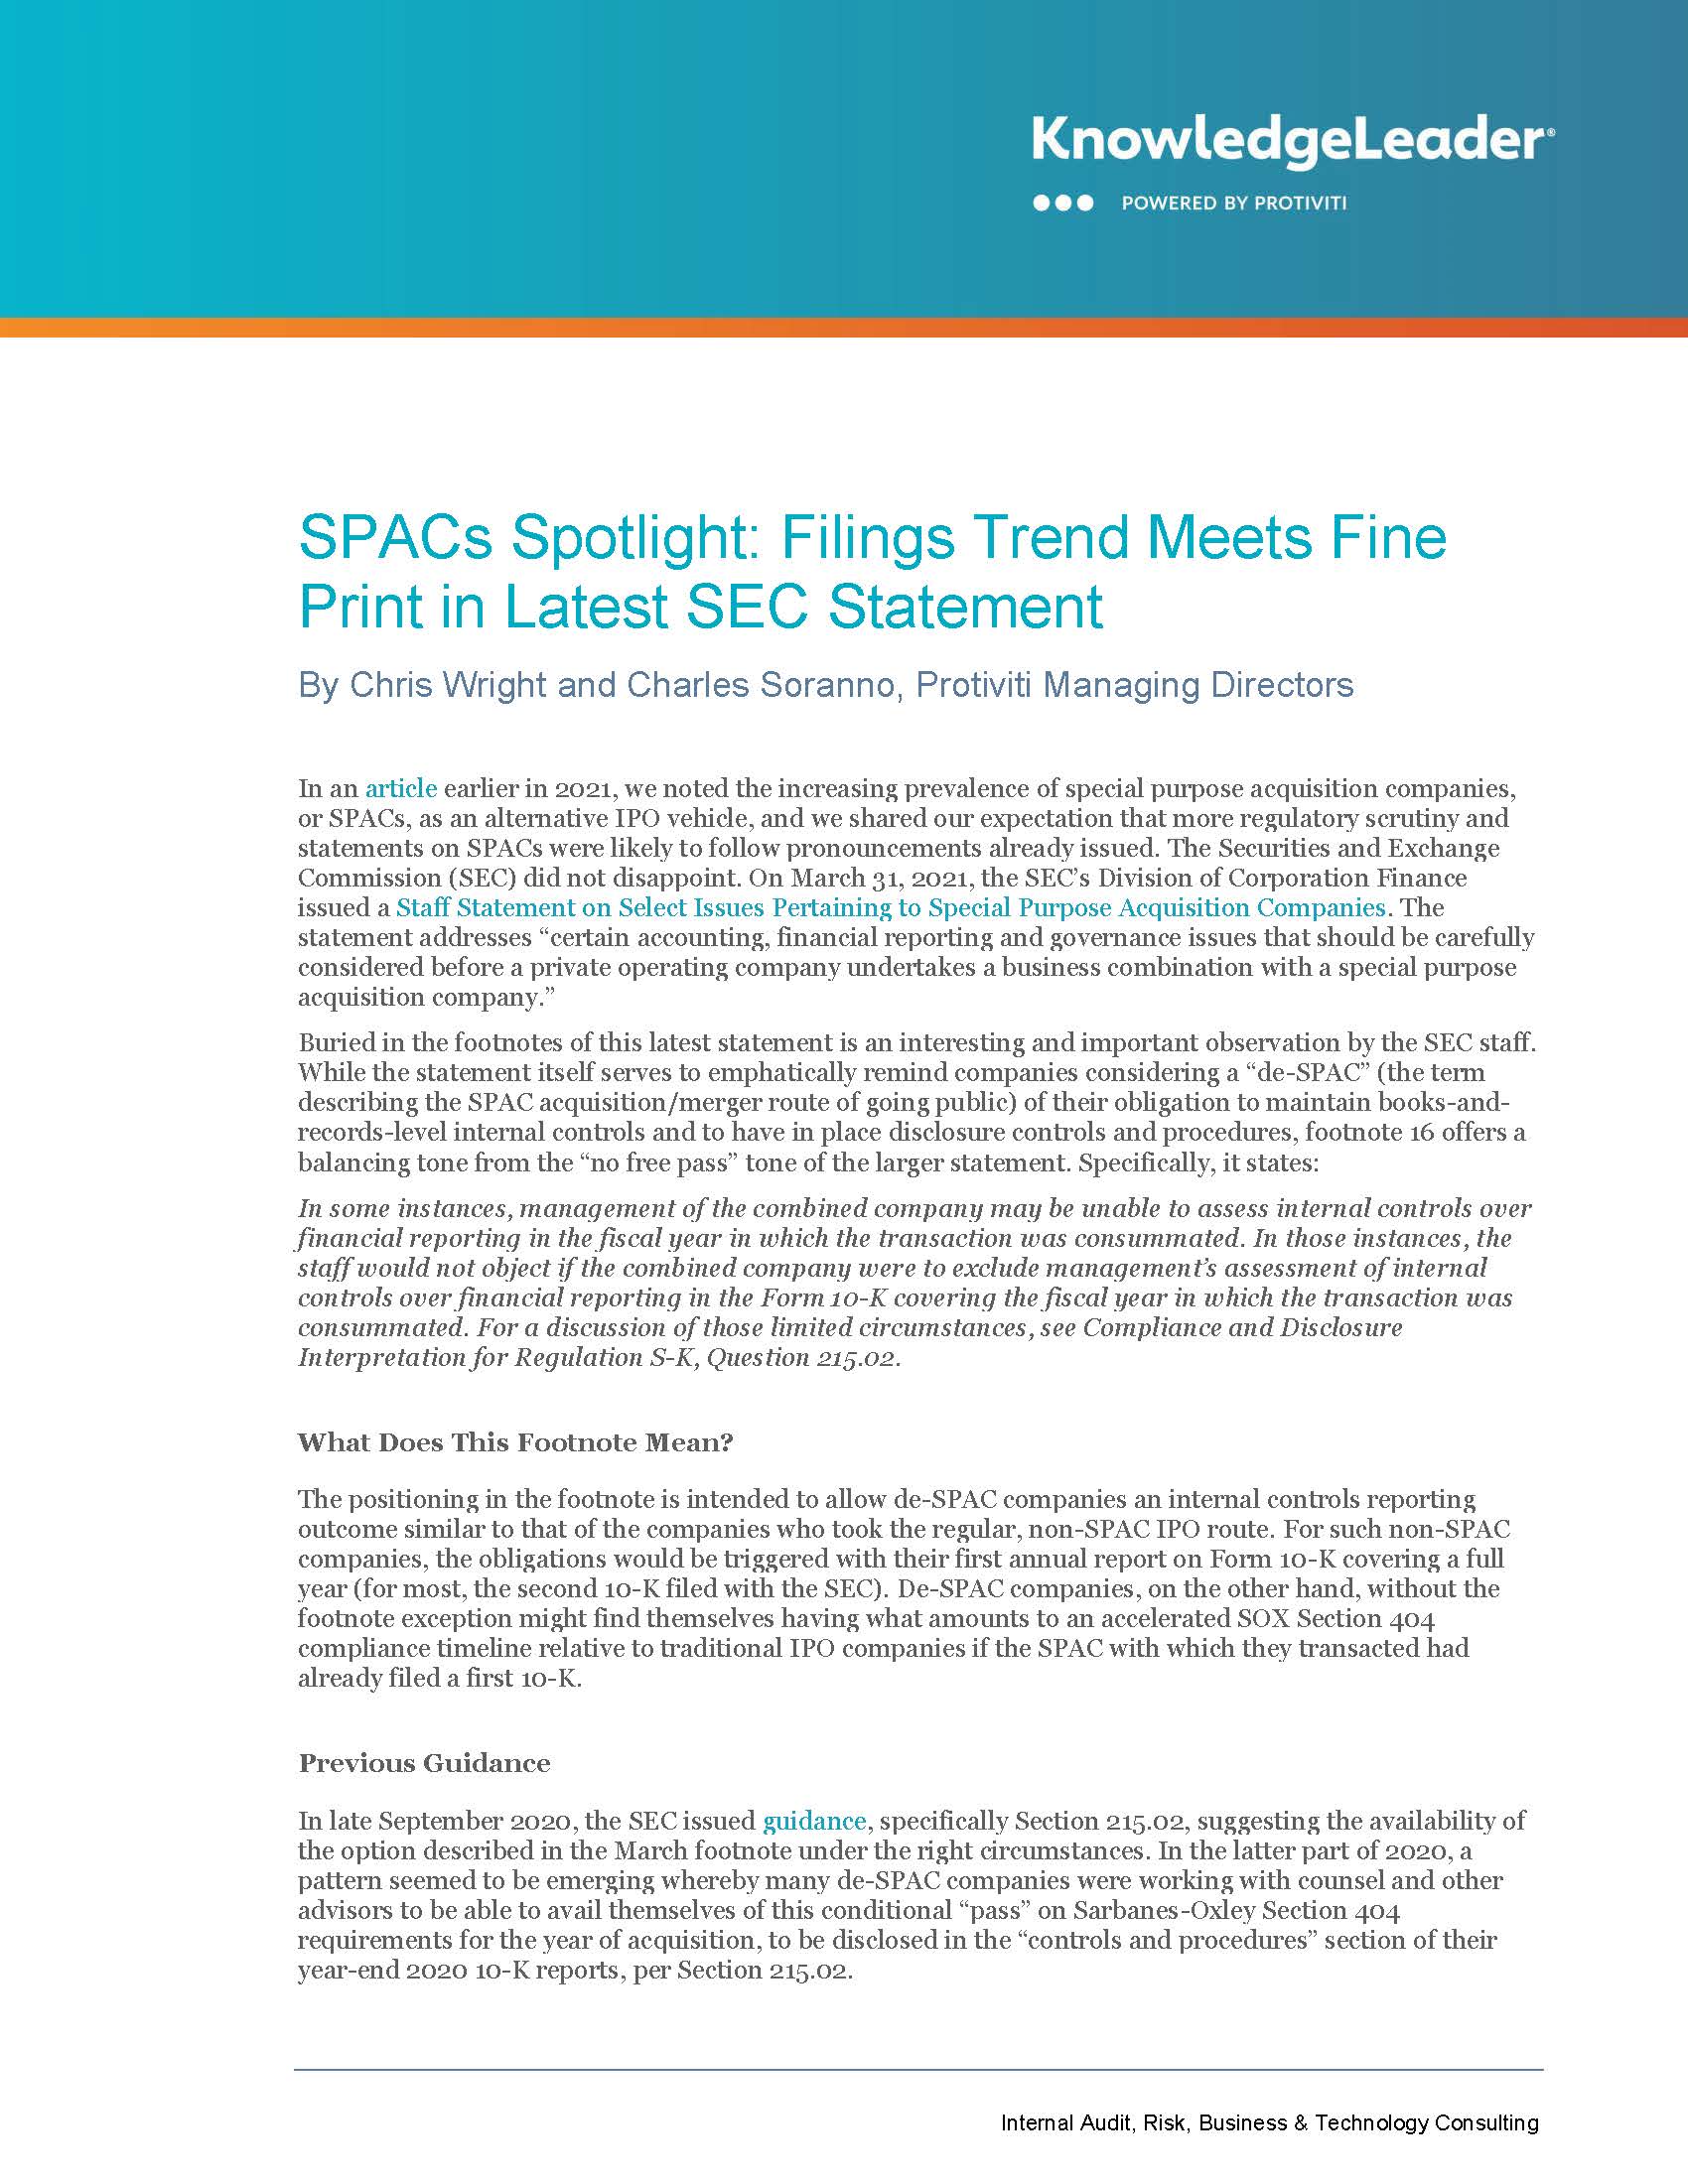 Screenshot of the first page of SPACs Spotlight Filings Trend Meets Fine Print in Latest SEC Statement